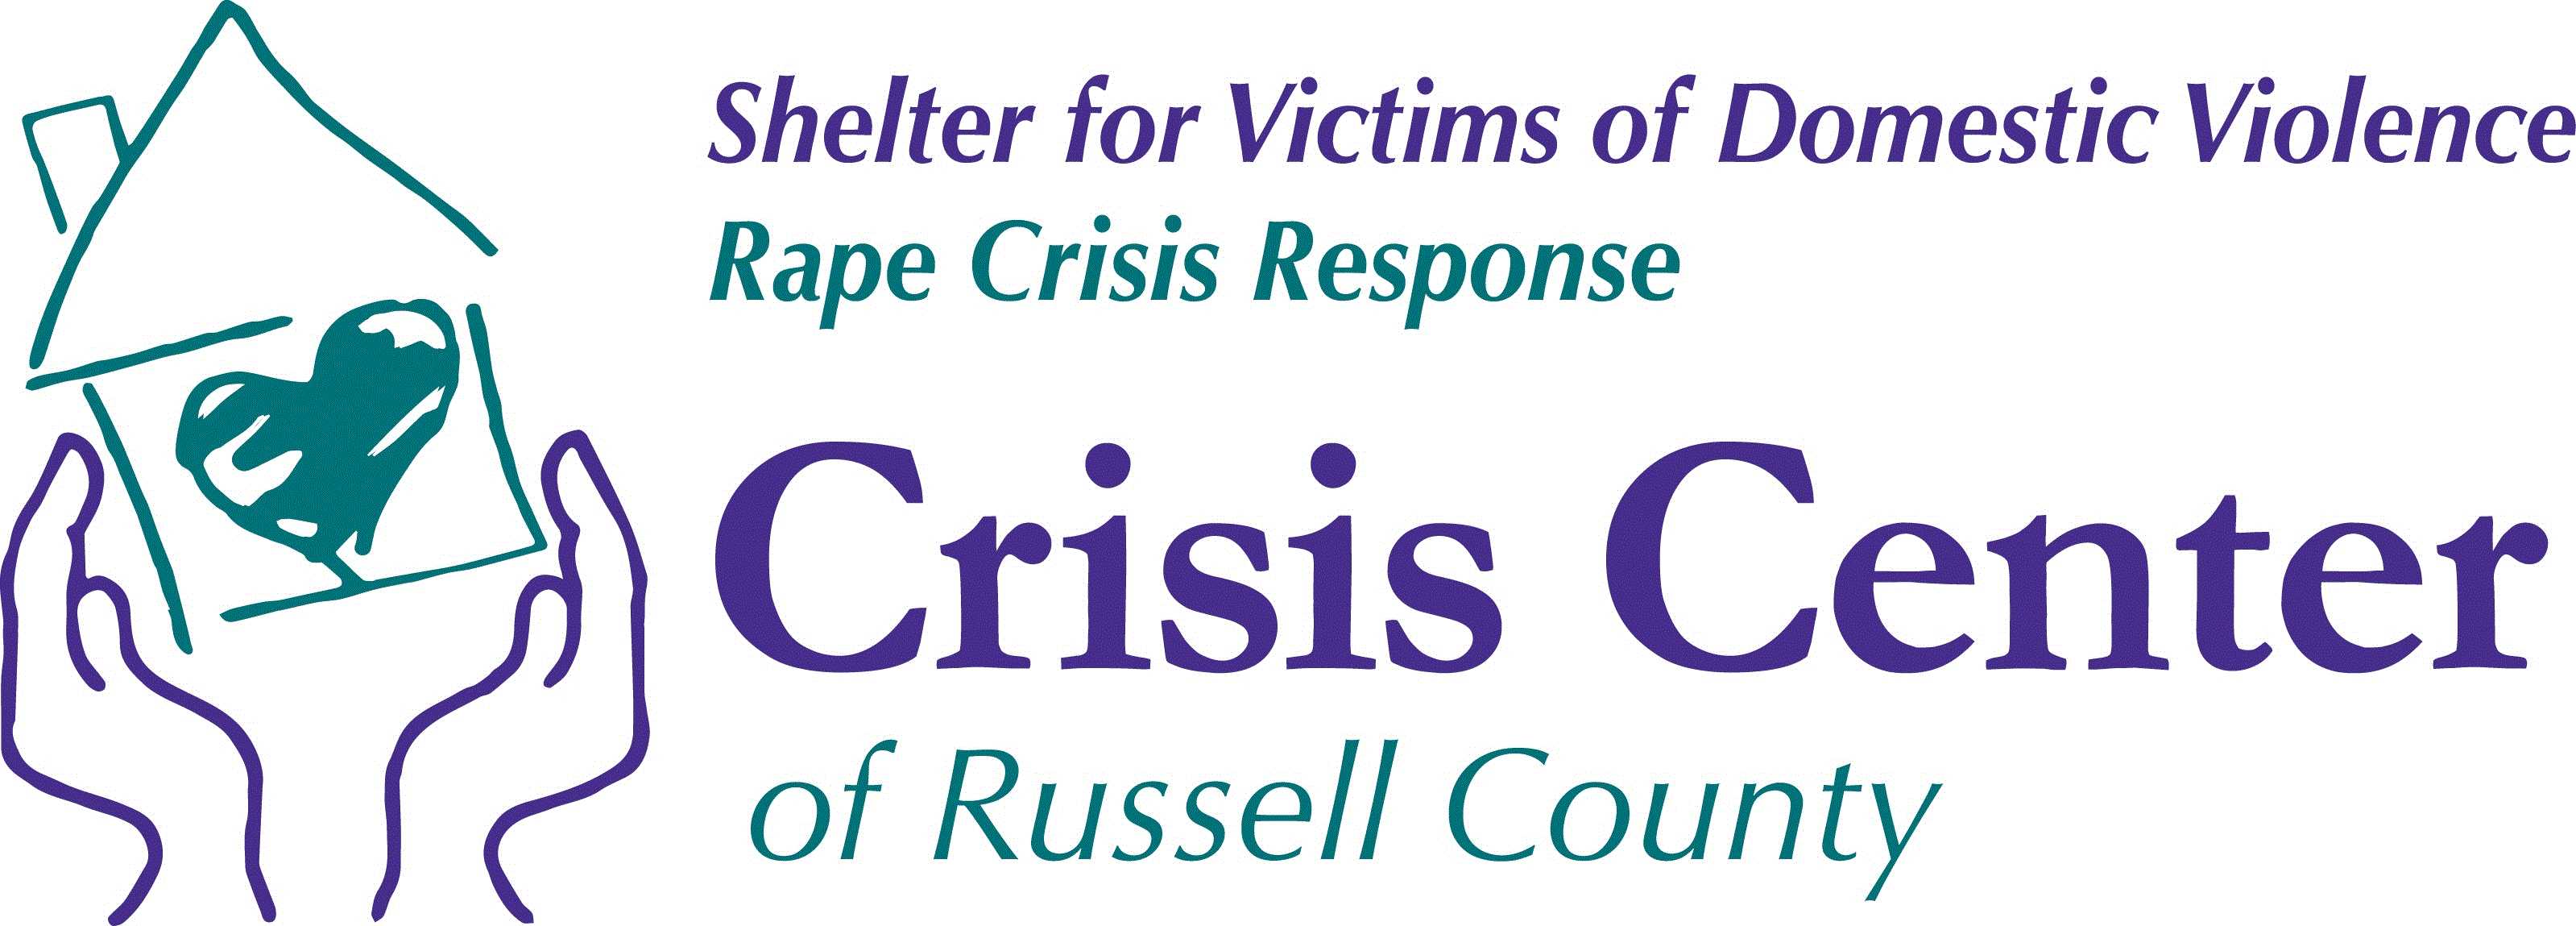 Crisis Center of Russell County